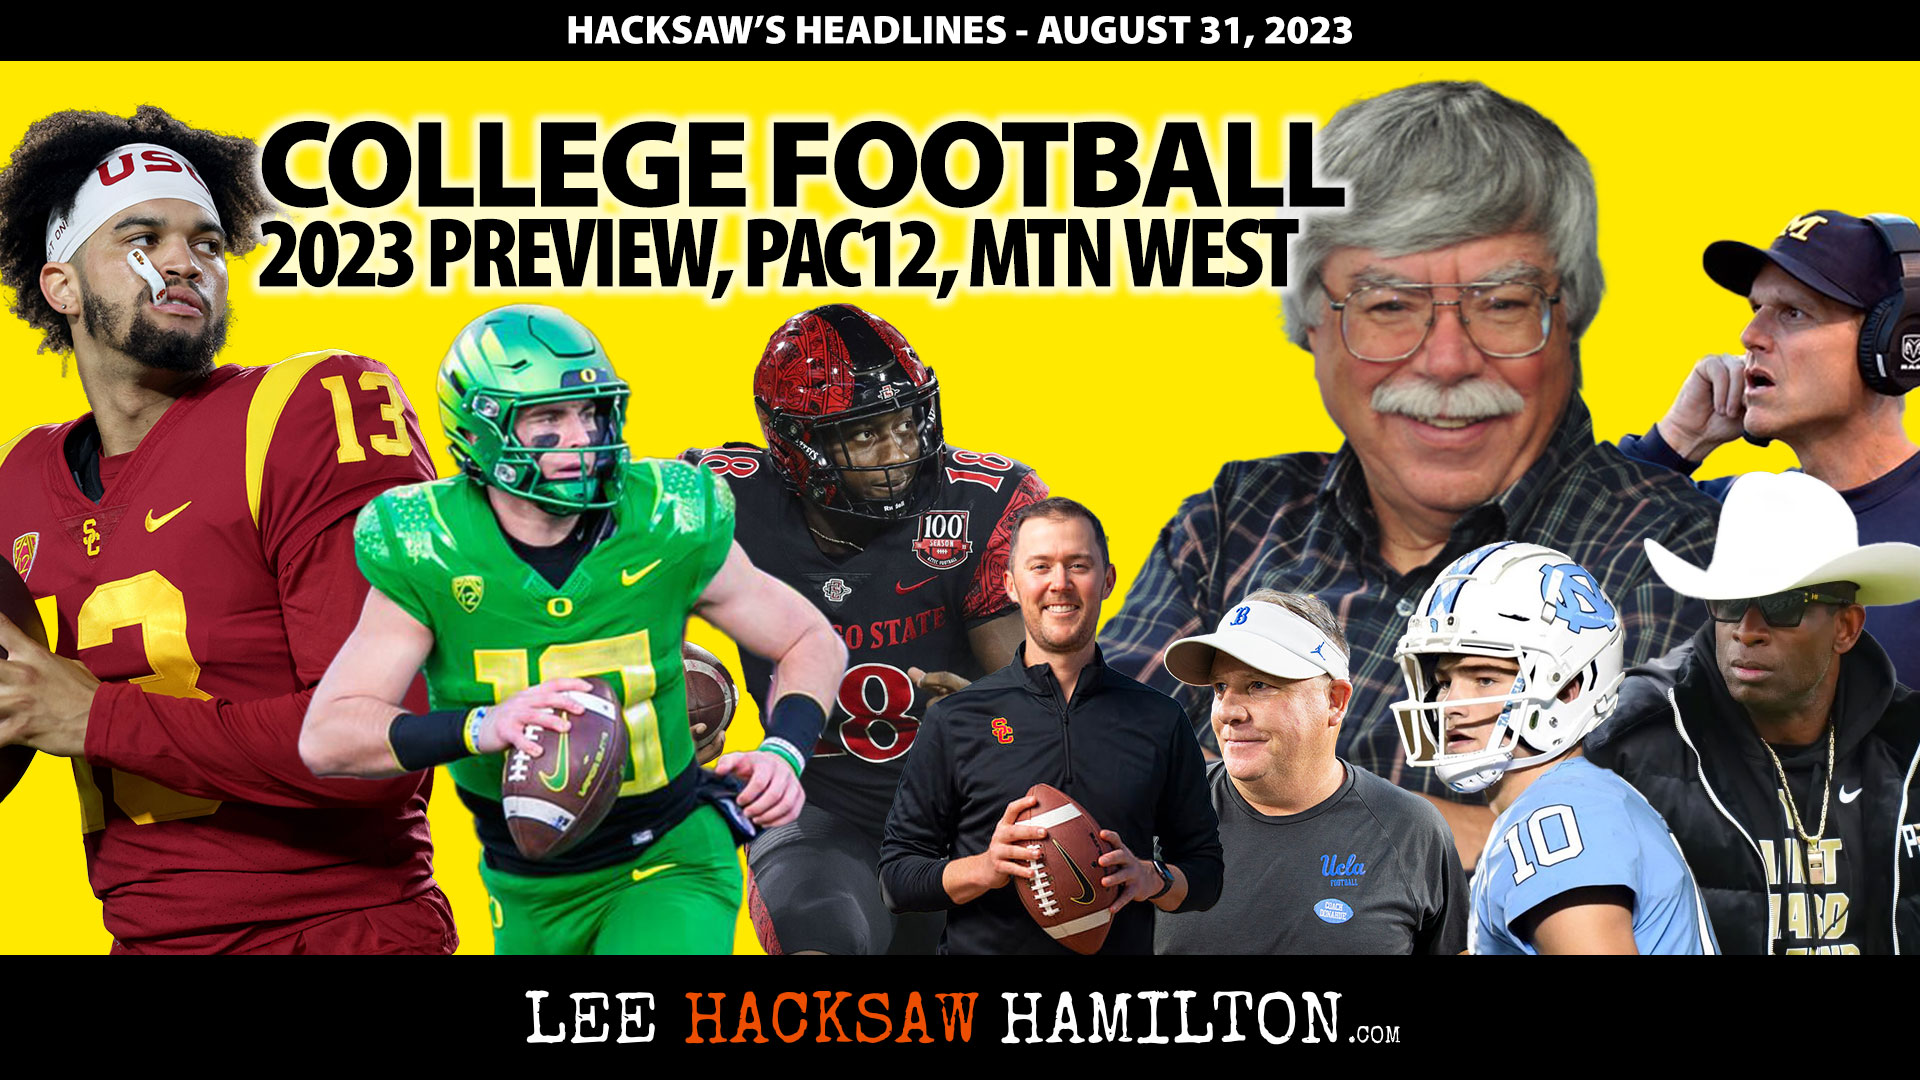 Lee Hacksaw Hamilton discusses 2023 College Football Preview: Top 20, PAC12, Mountain West